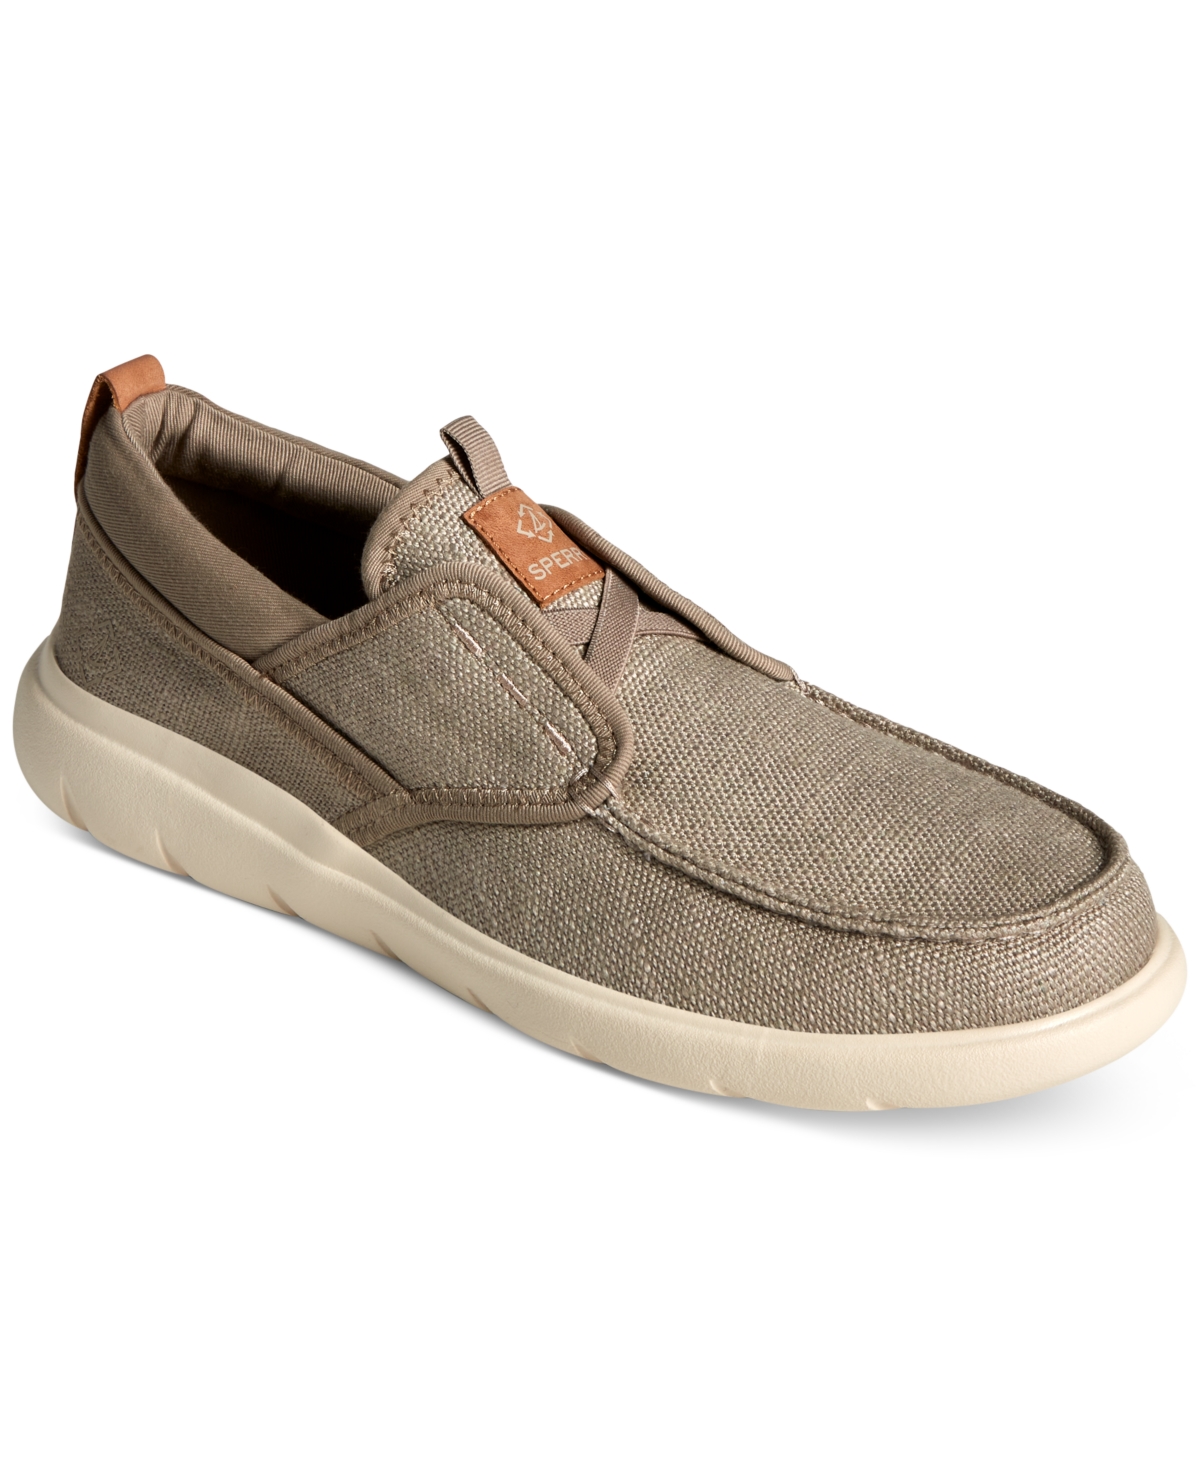 Men's SeaCycled Captain's Moc Baja Boat Shoes - Taupe